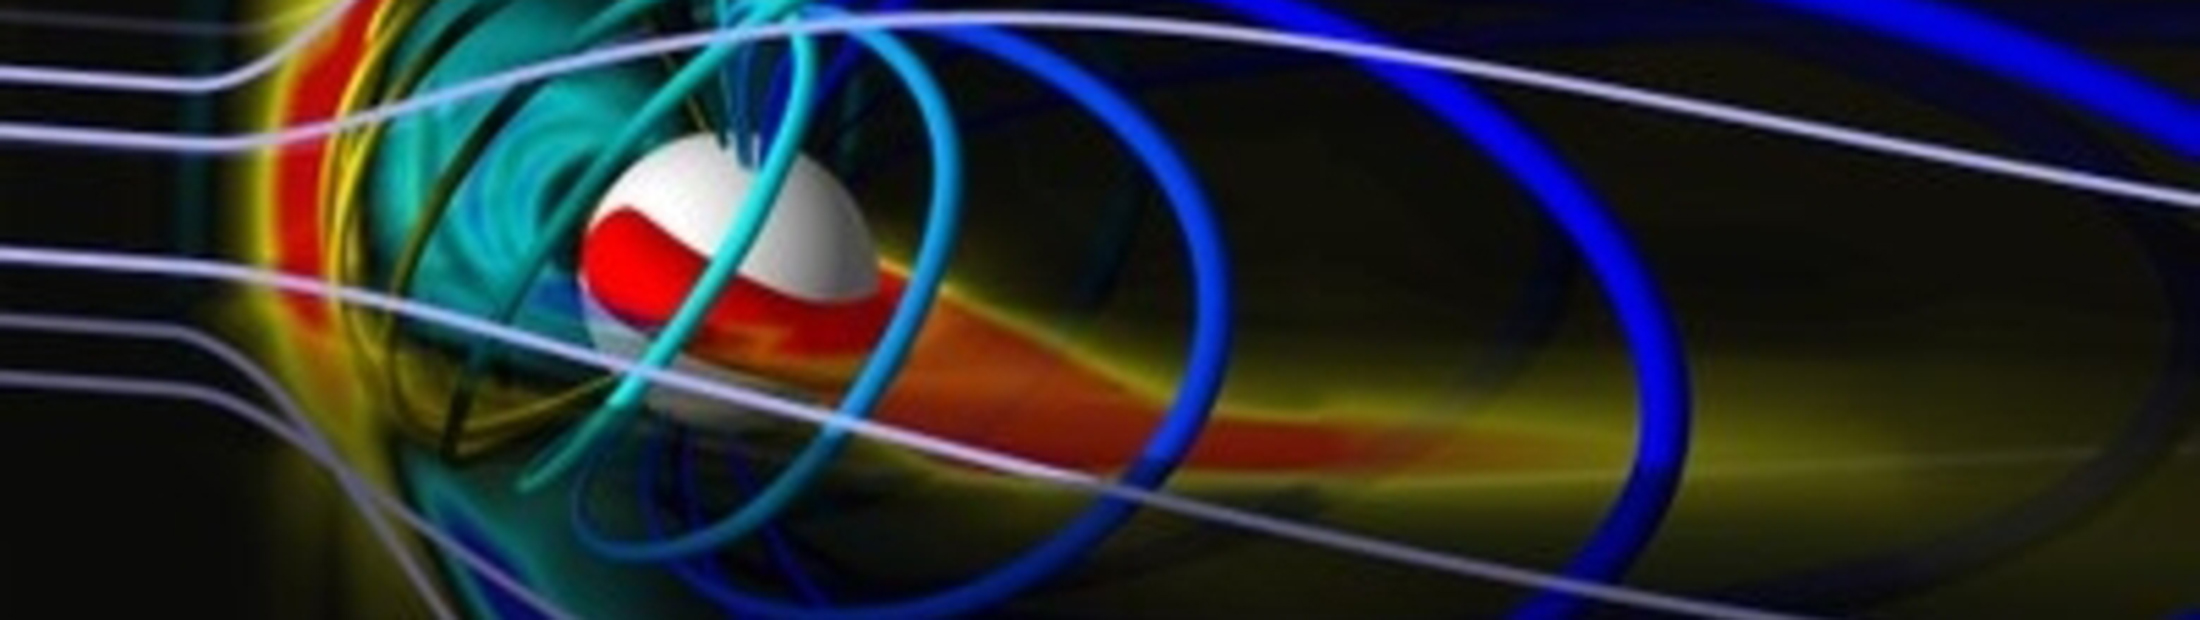 A graphic of a sphere with multicolored lines flowing around it.